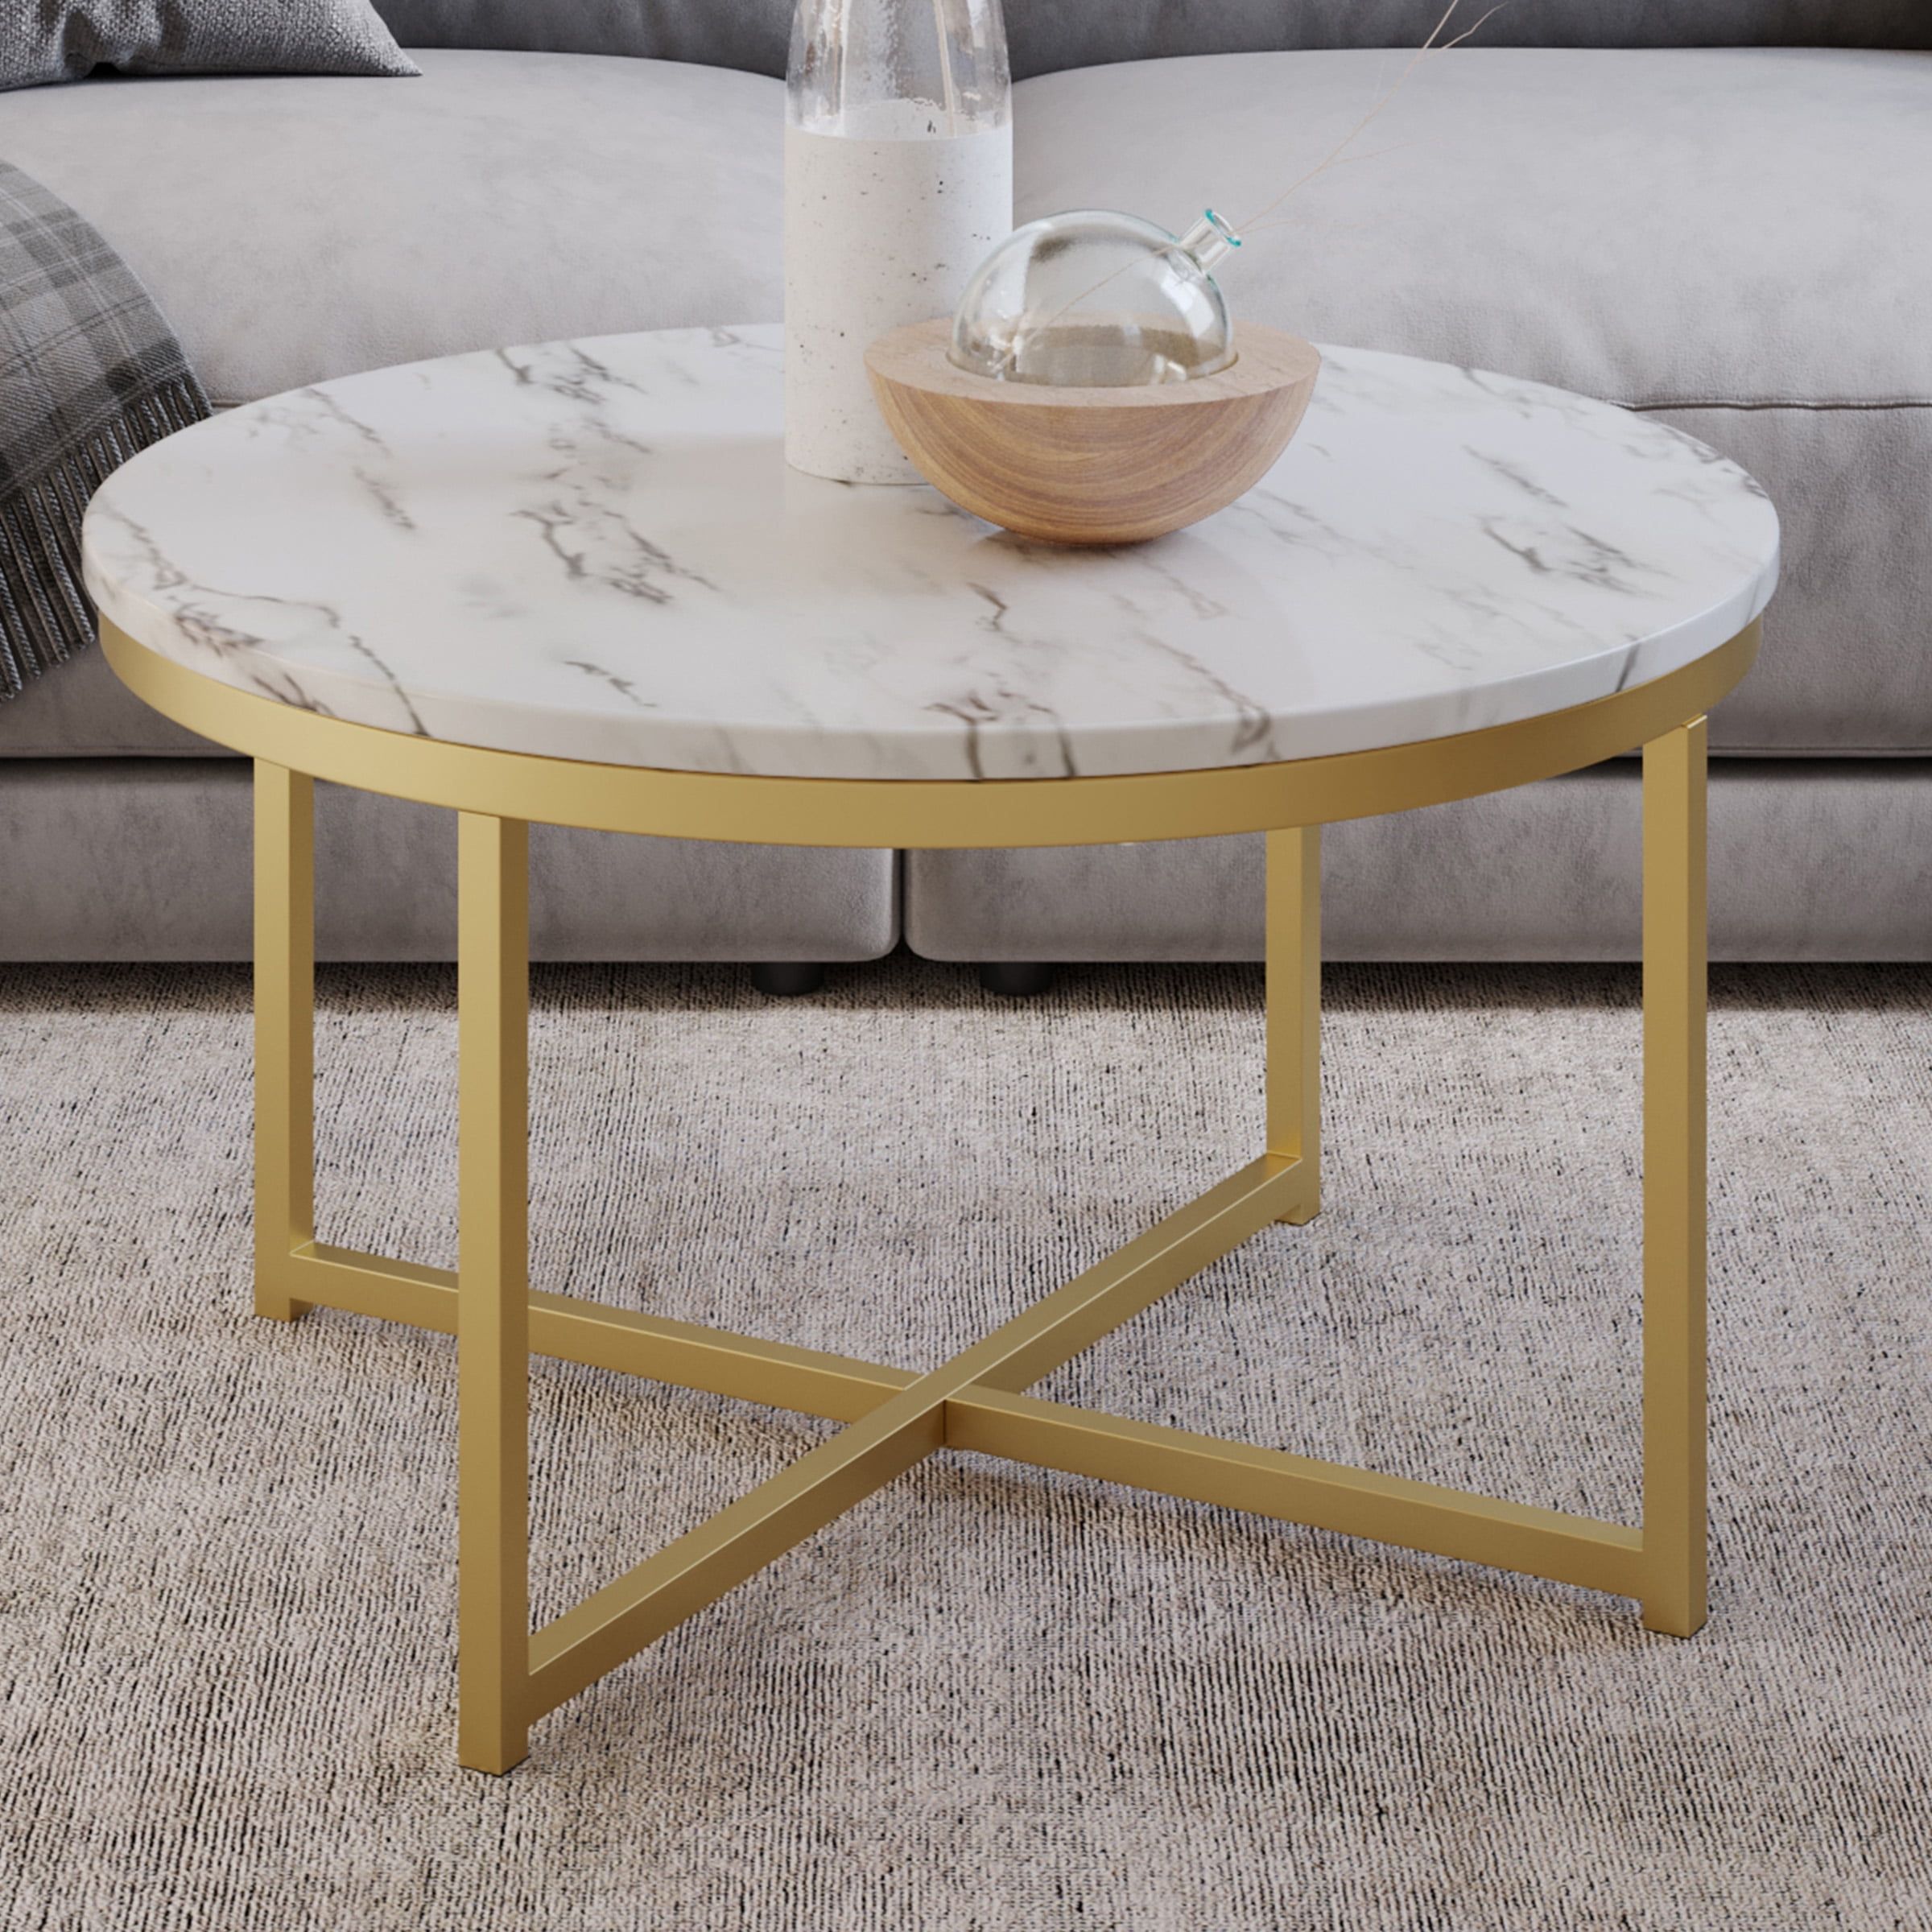 Lavish Home Round Coffee Table With Faux Marble Top And Metal Crossbeam  Base, White/gold – Walmart Within Modern Round Faux Marble Coffee Tables (View 11 of 15)